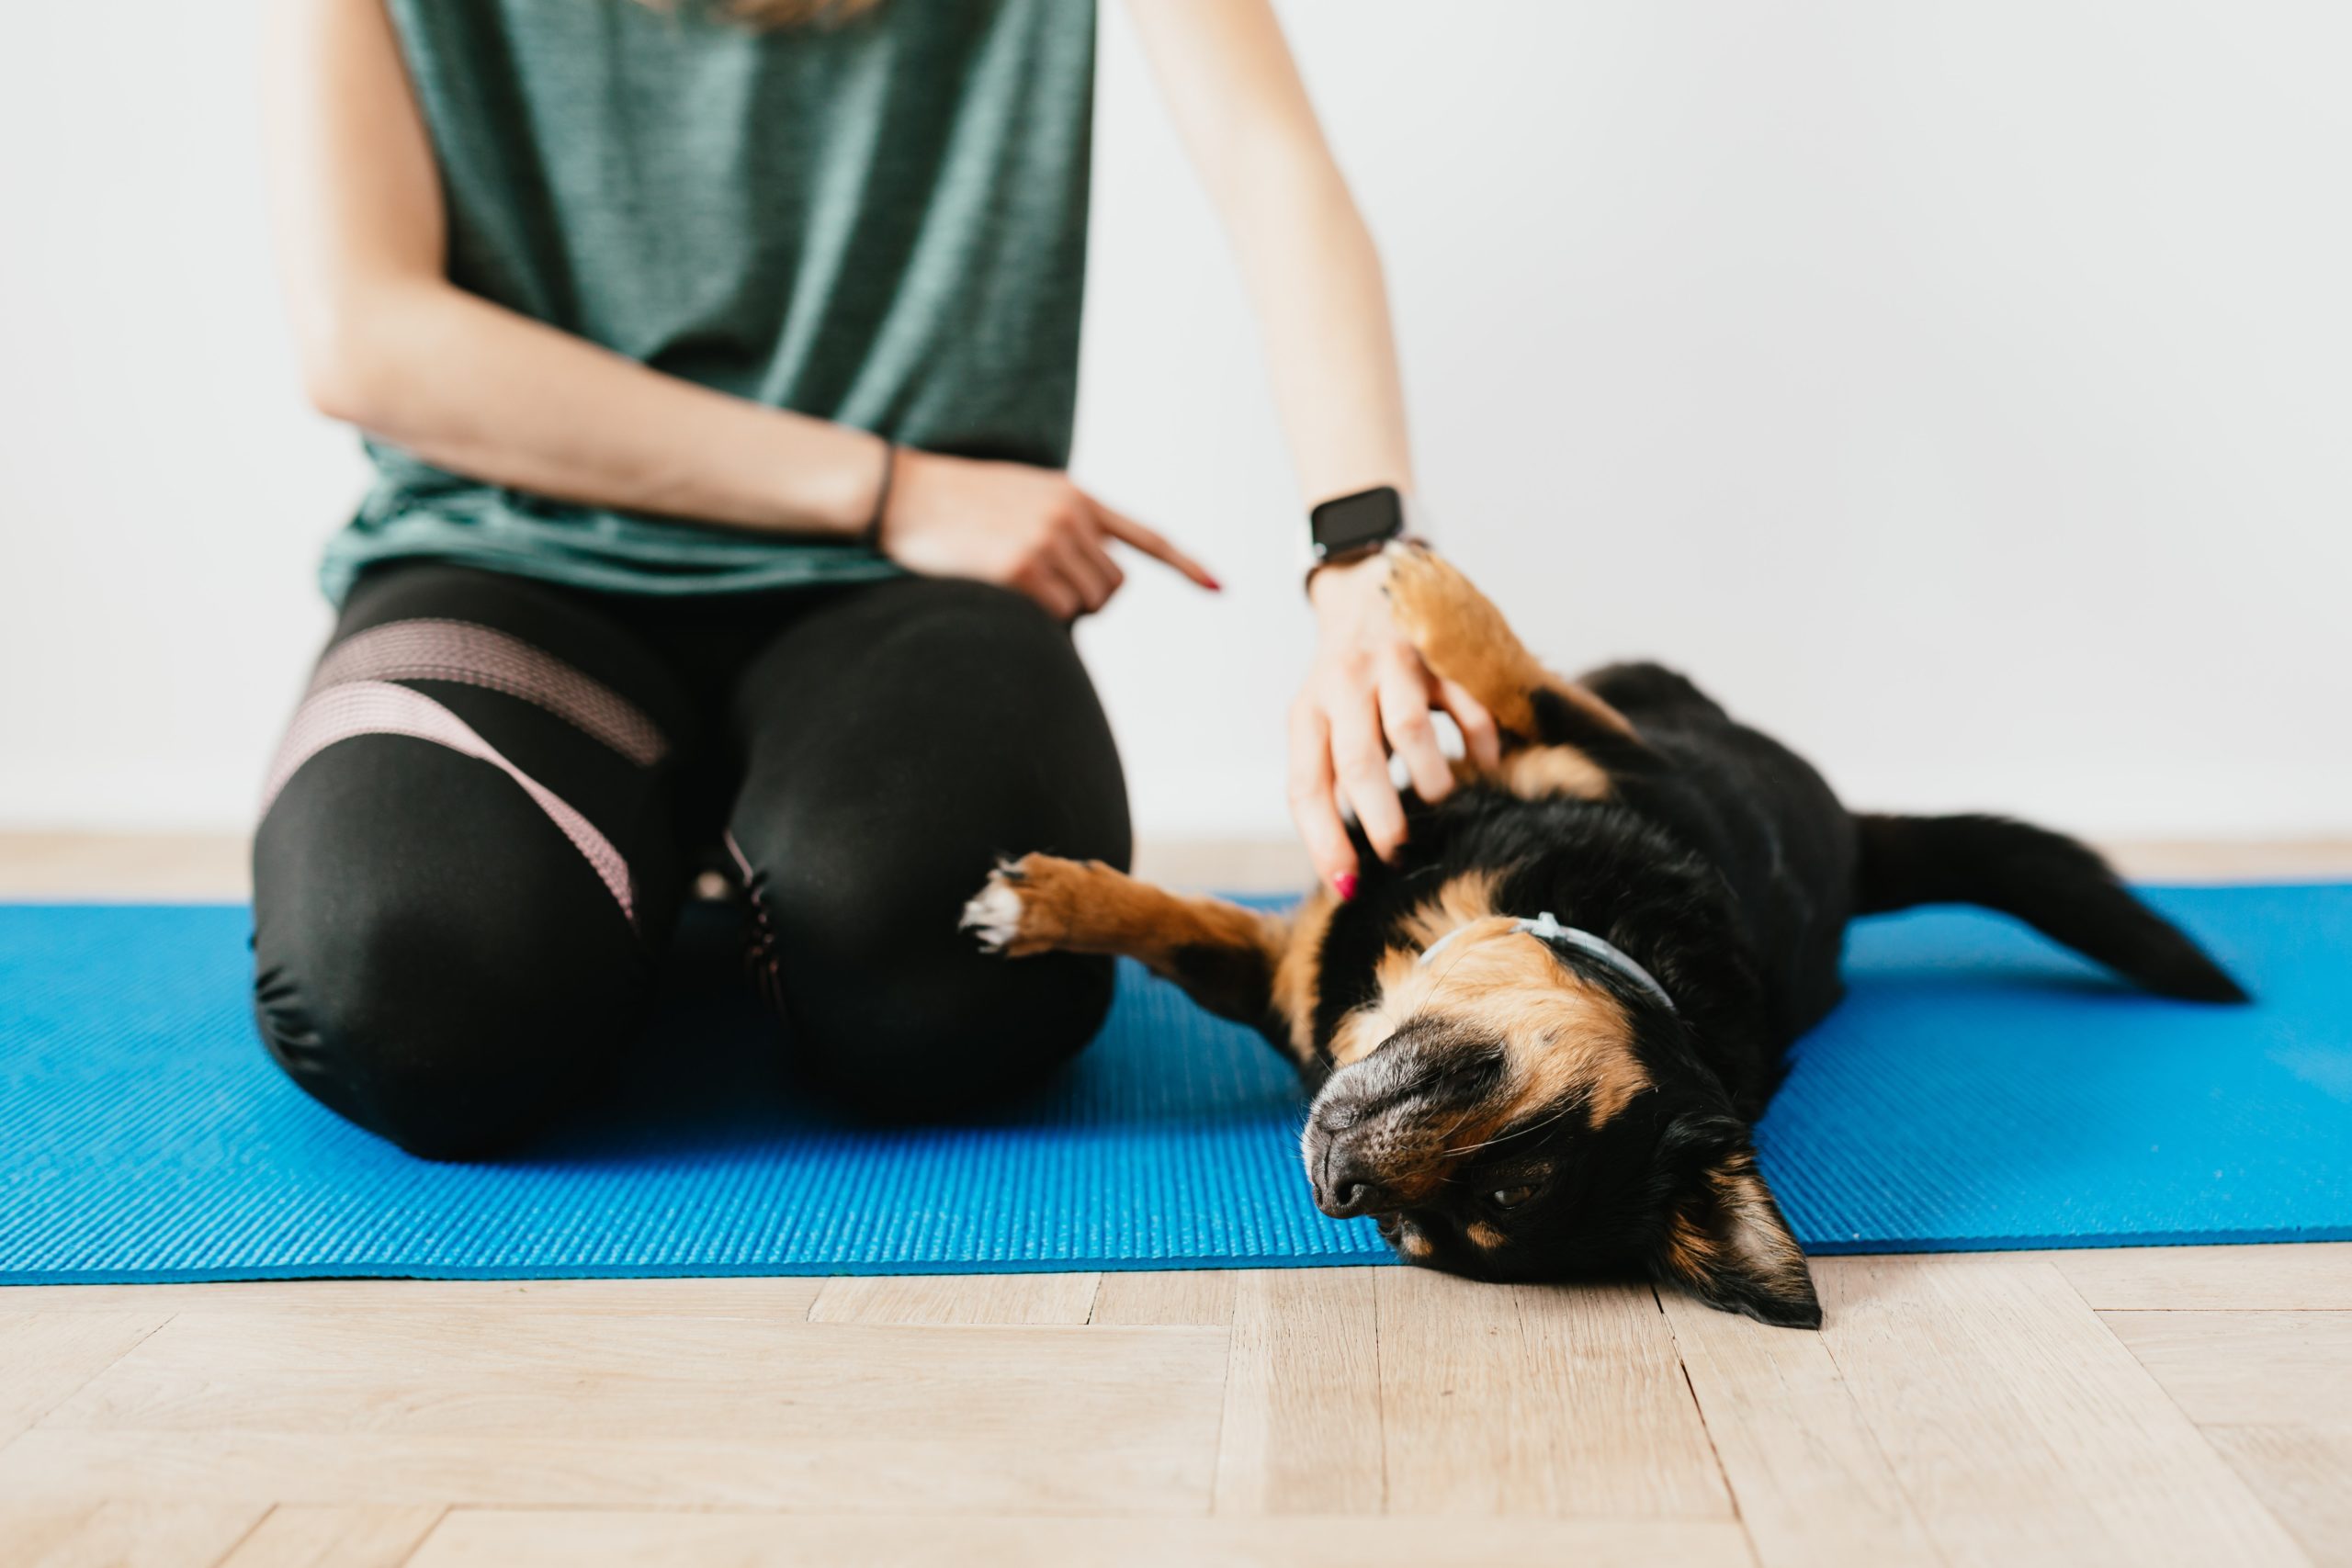 Dog rolling on blue yoga mat next to owner